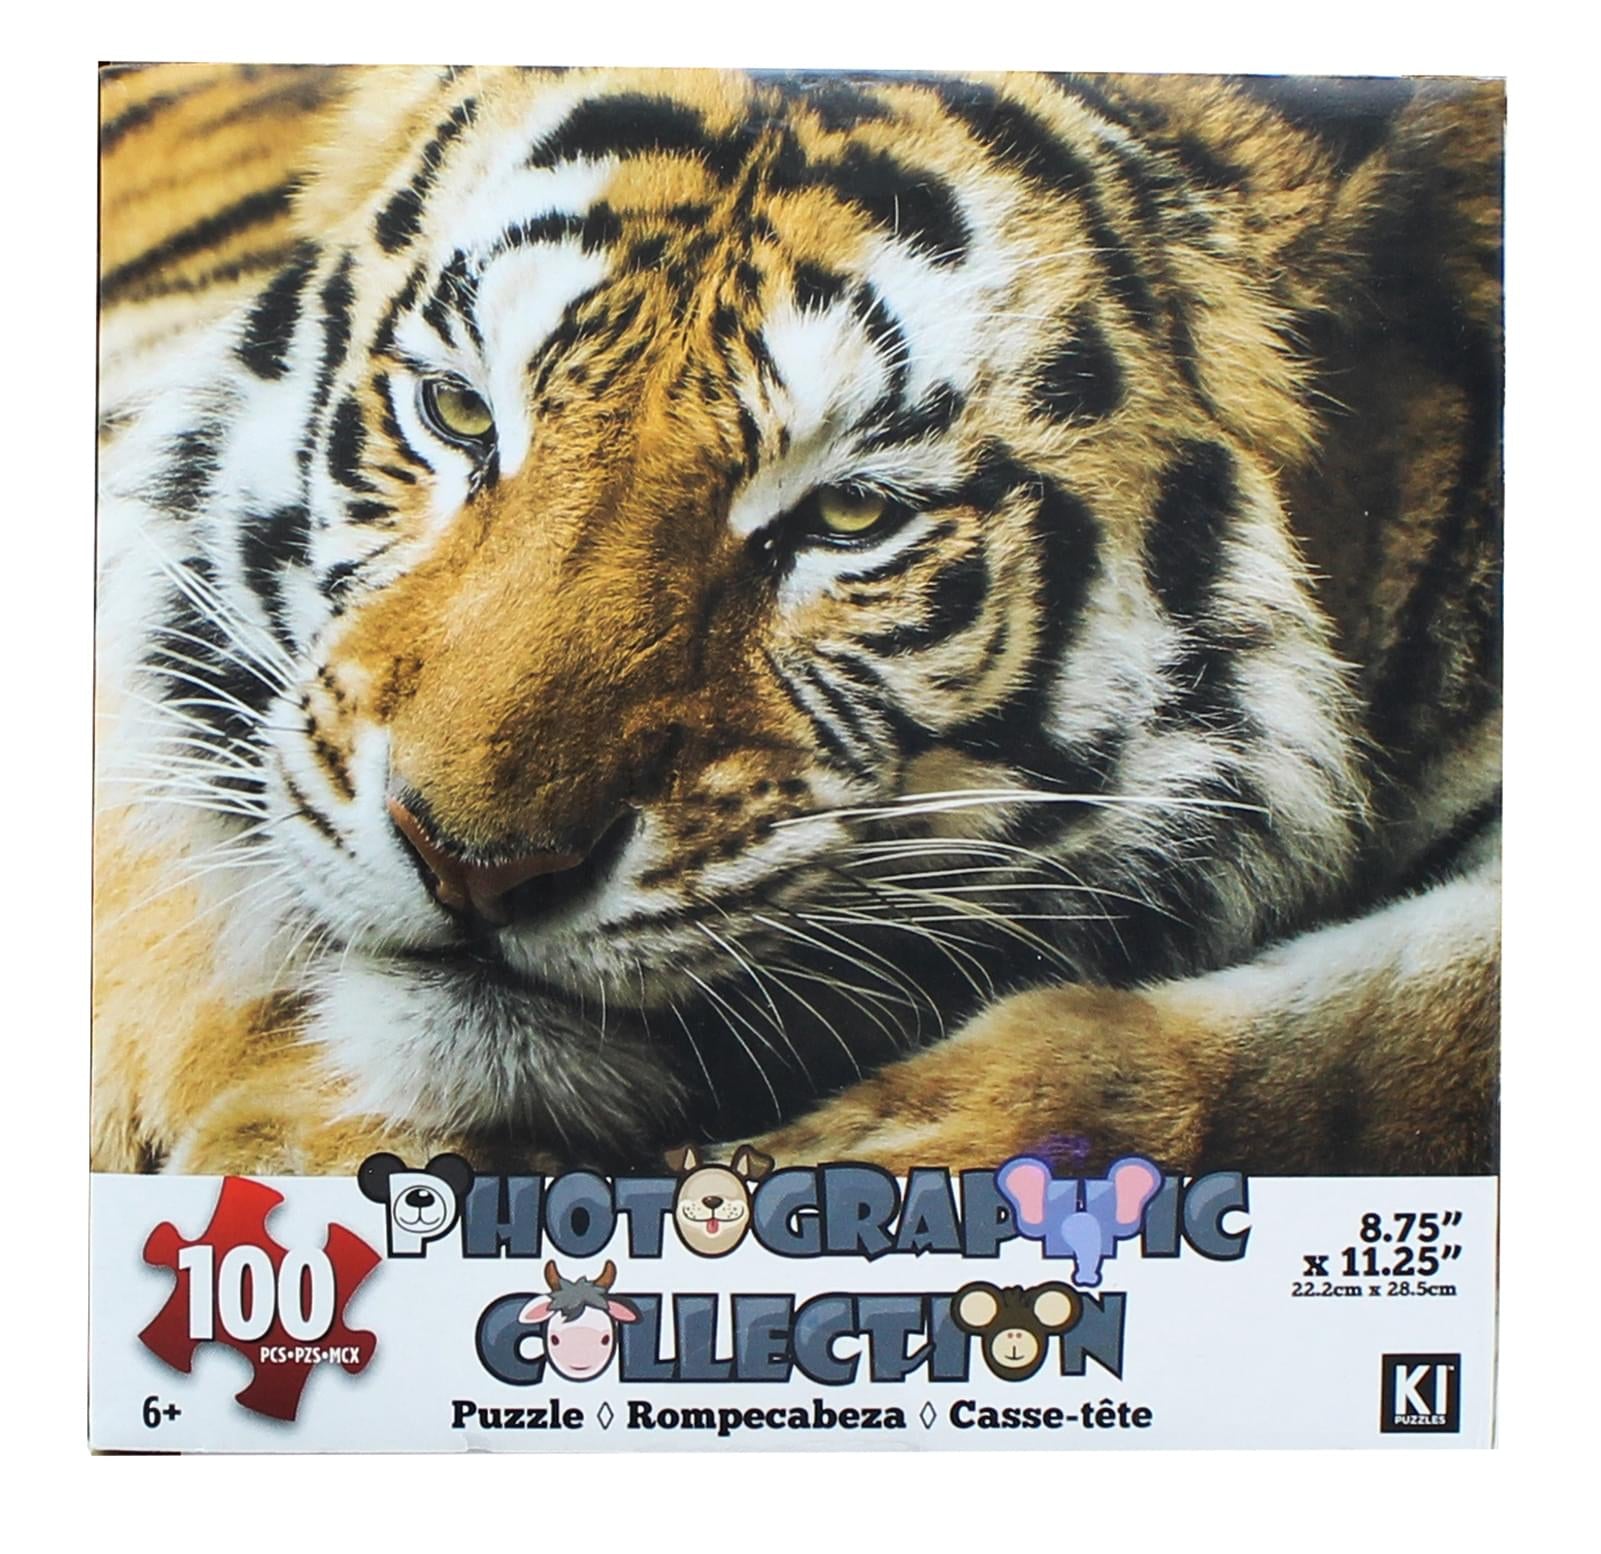 Tiger 100 Piece Photographic Collection Jigsaw Puzzle